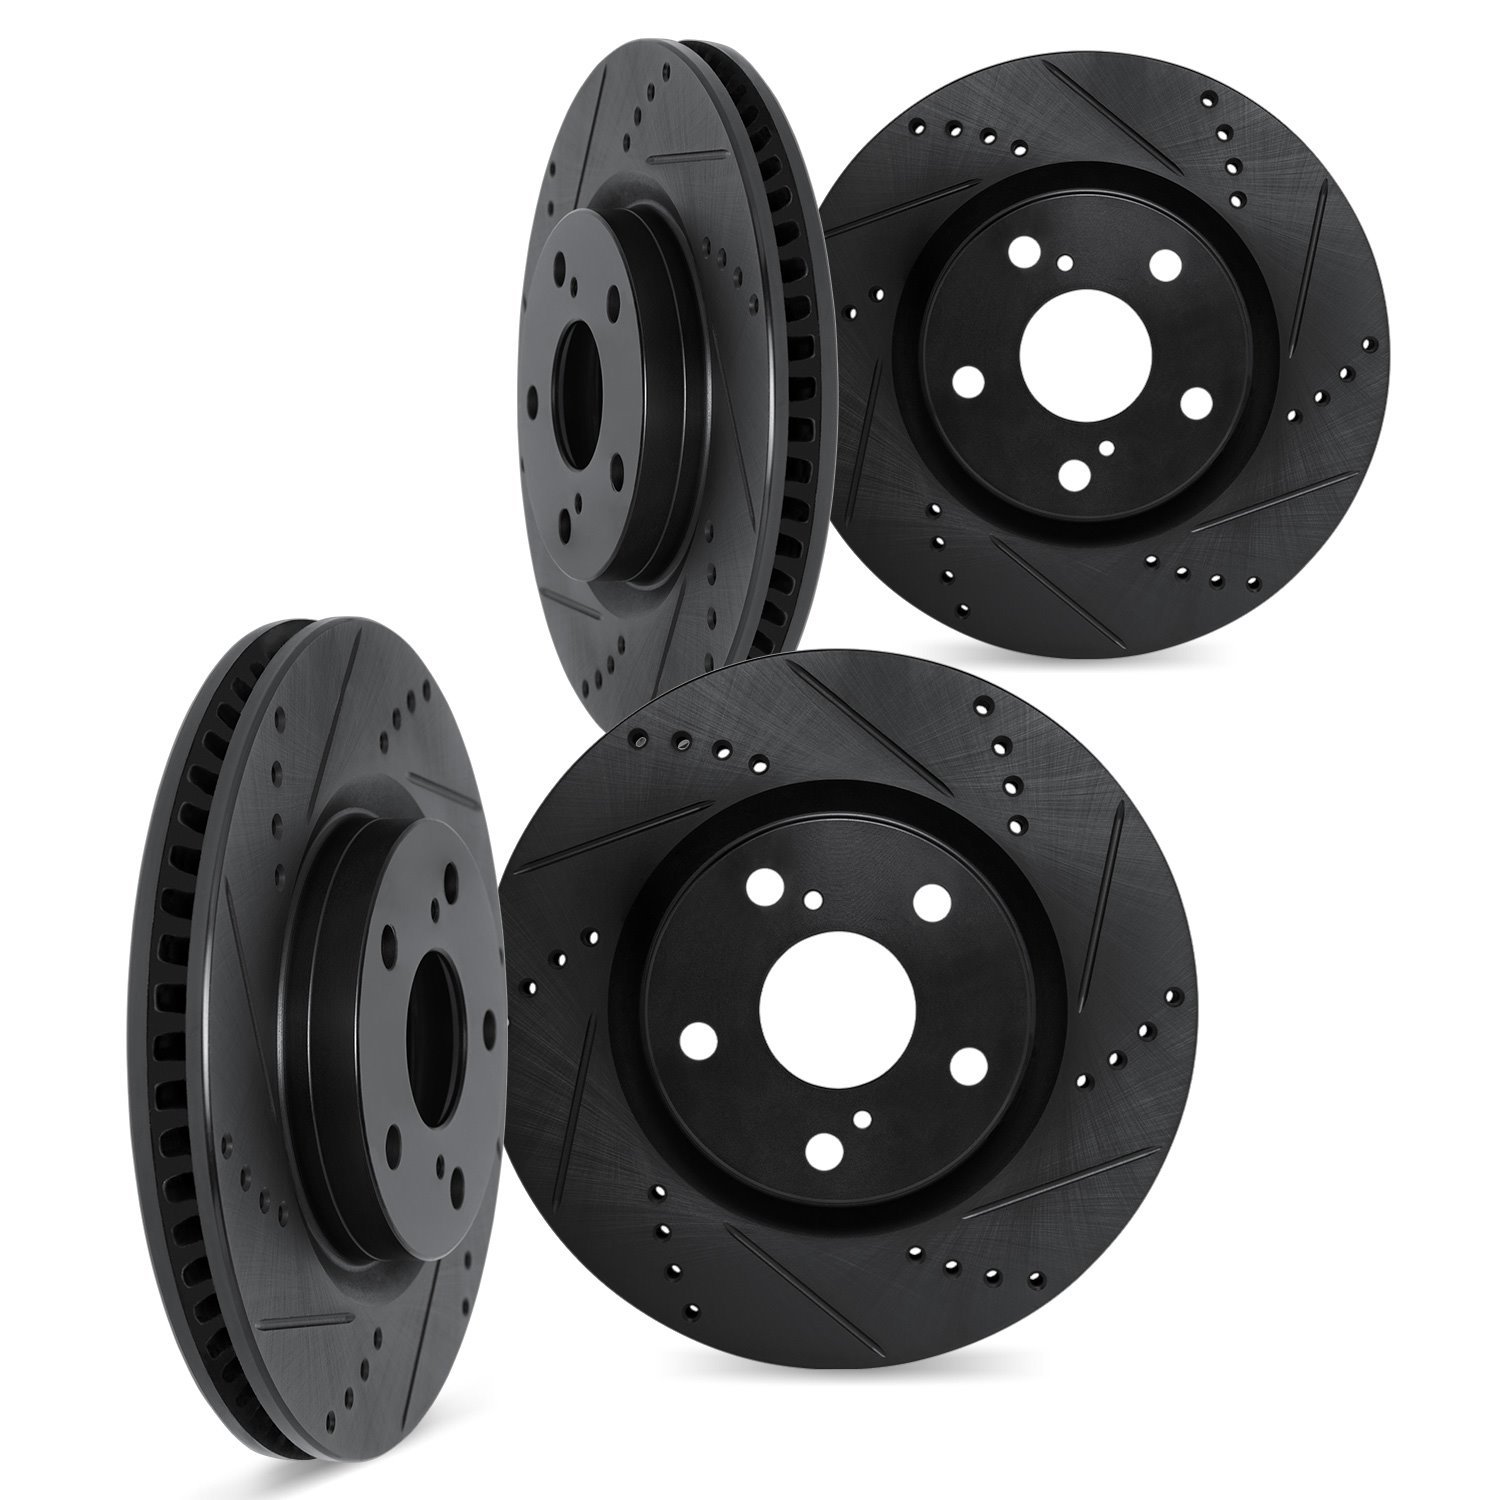 8004-73060 Drilled/Slotted Brake Rotors [Black], 2000-2002 Audi/Volkswagen, Position: Front and Rear